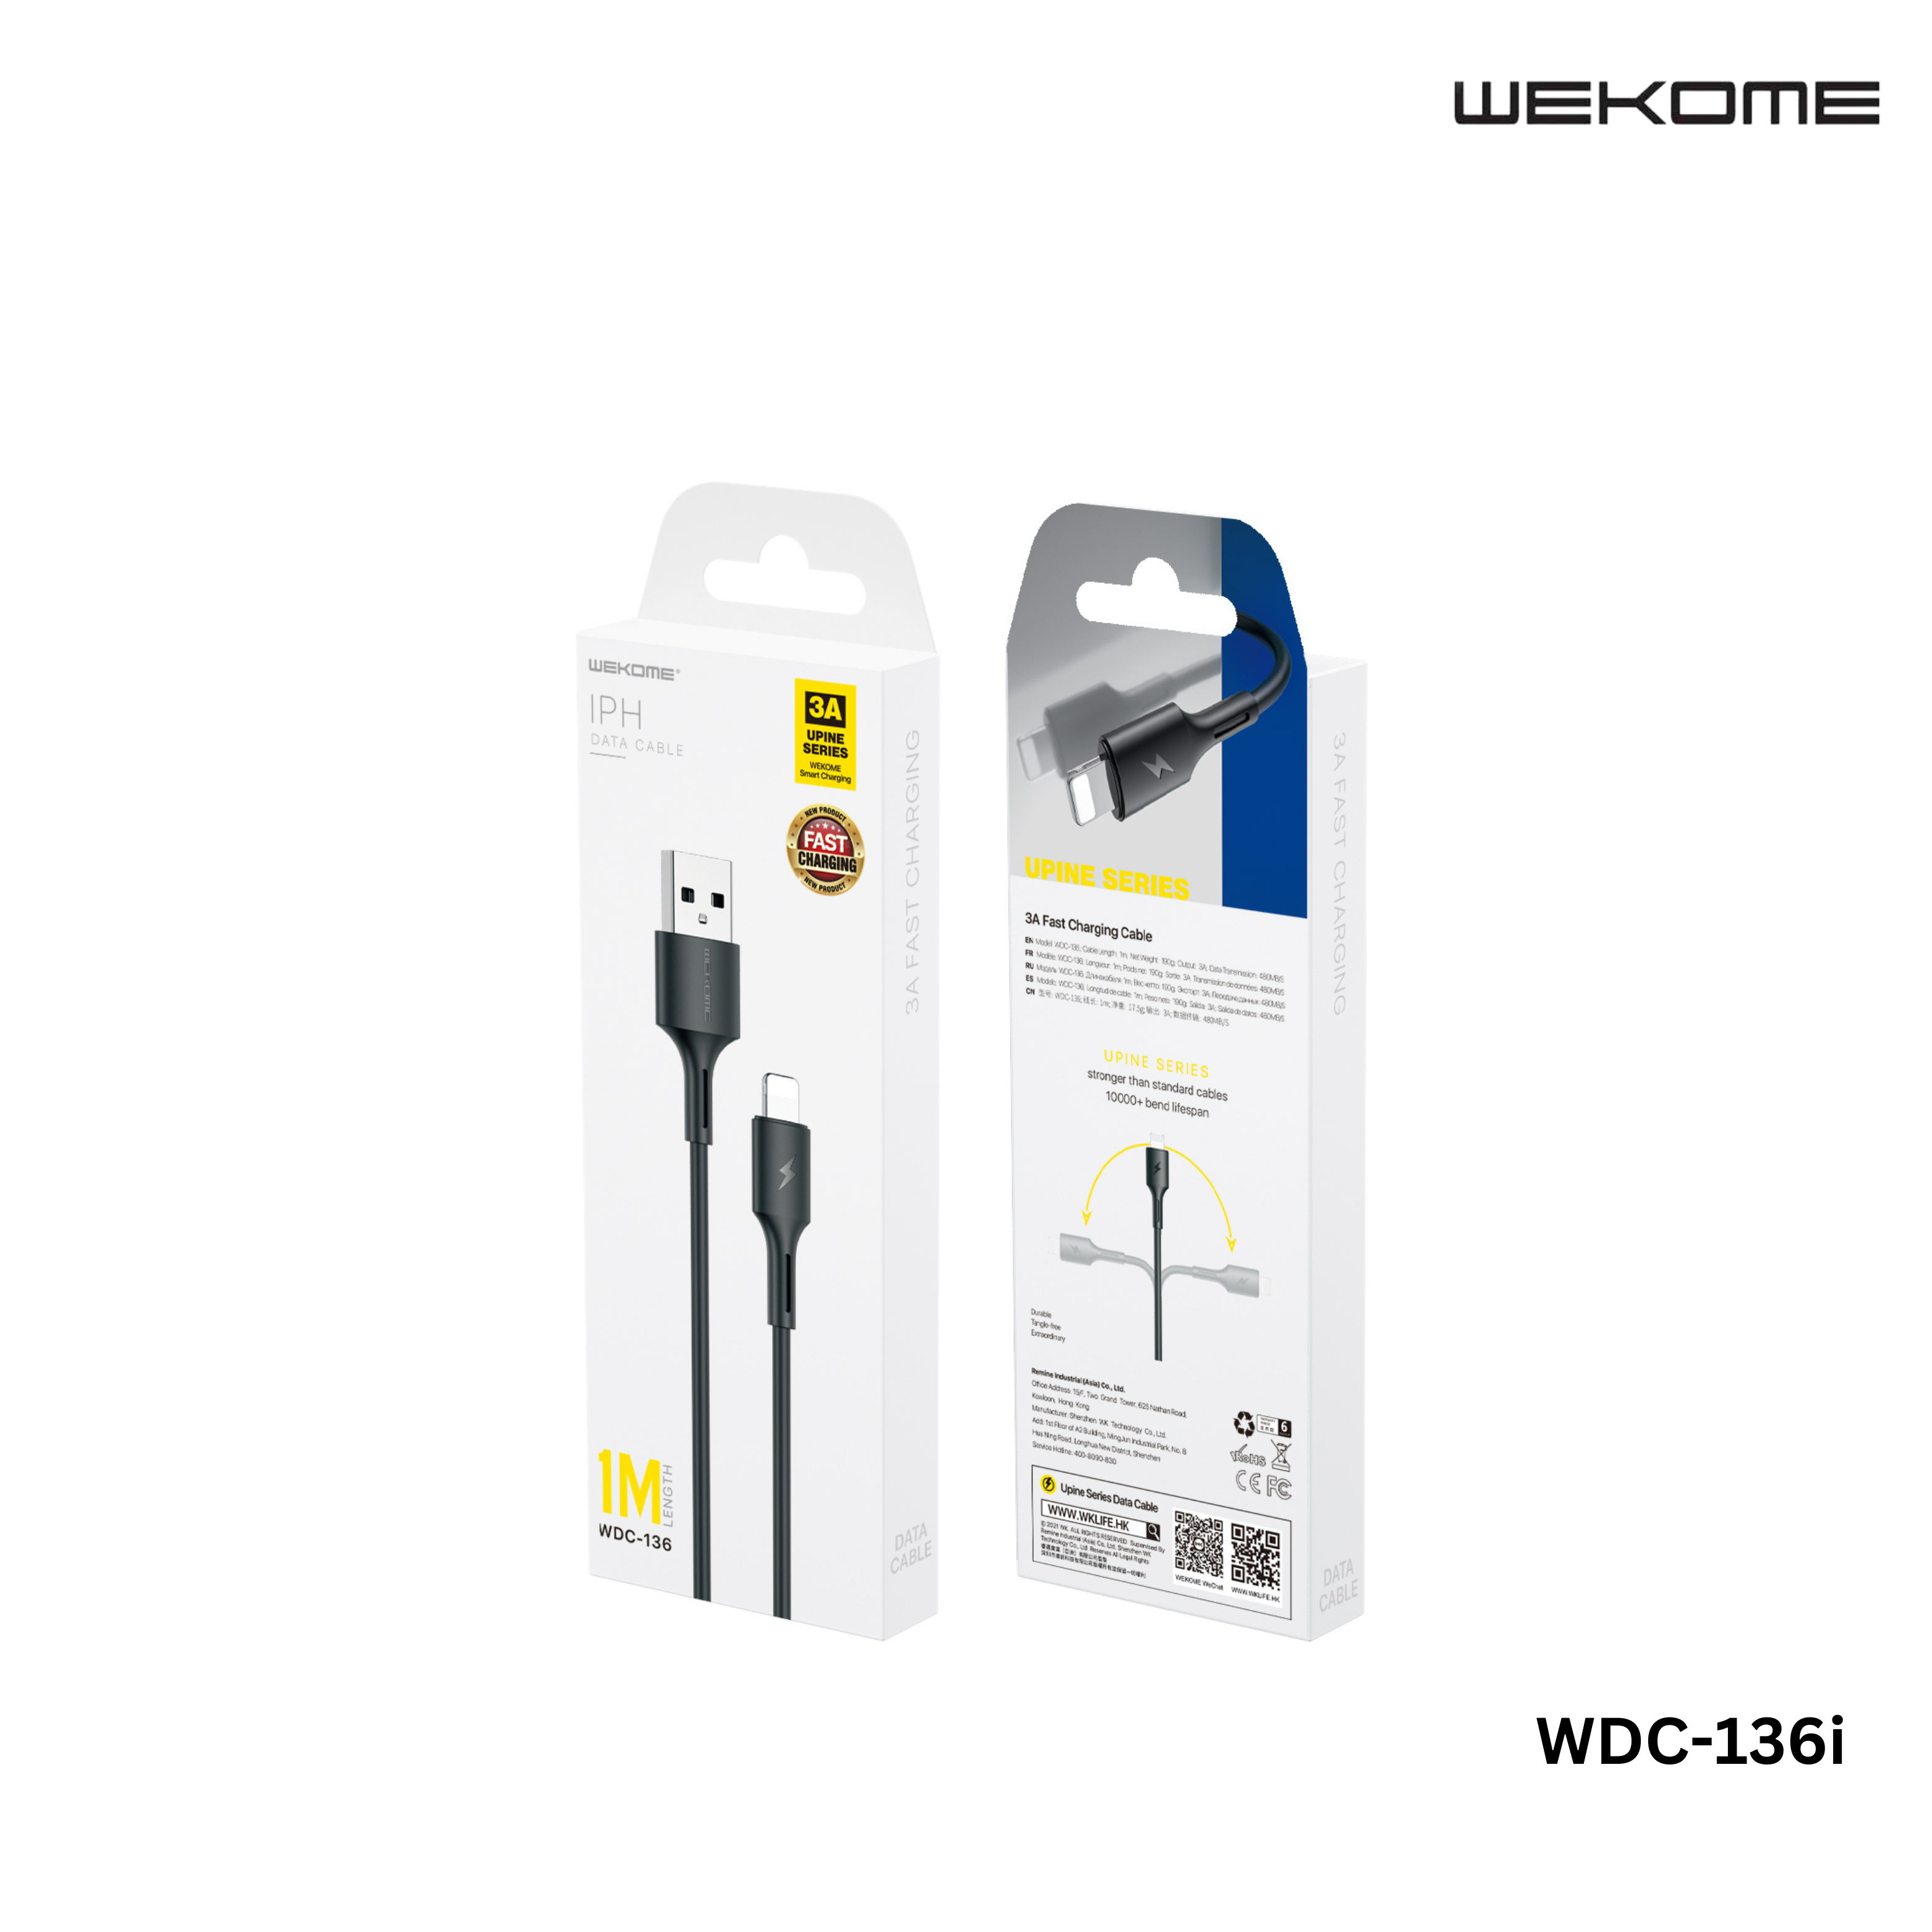 WK WDC-136I UPINE/YOUPIN SERIES 3A DATA CABLE FOR IPH, iPhone Cable- White